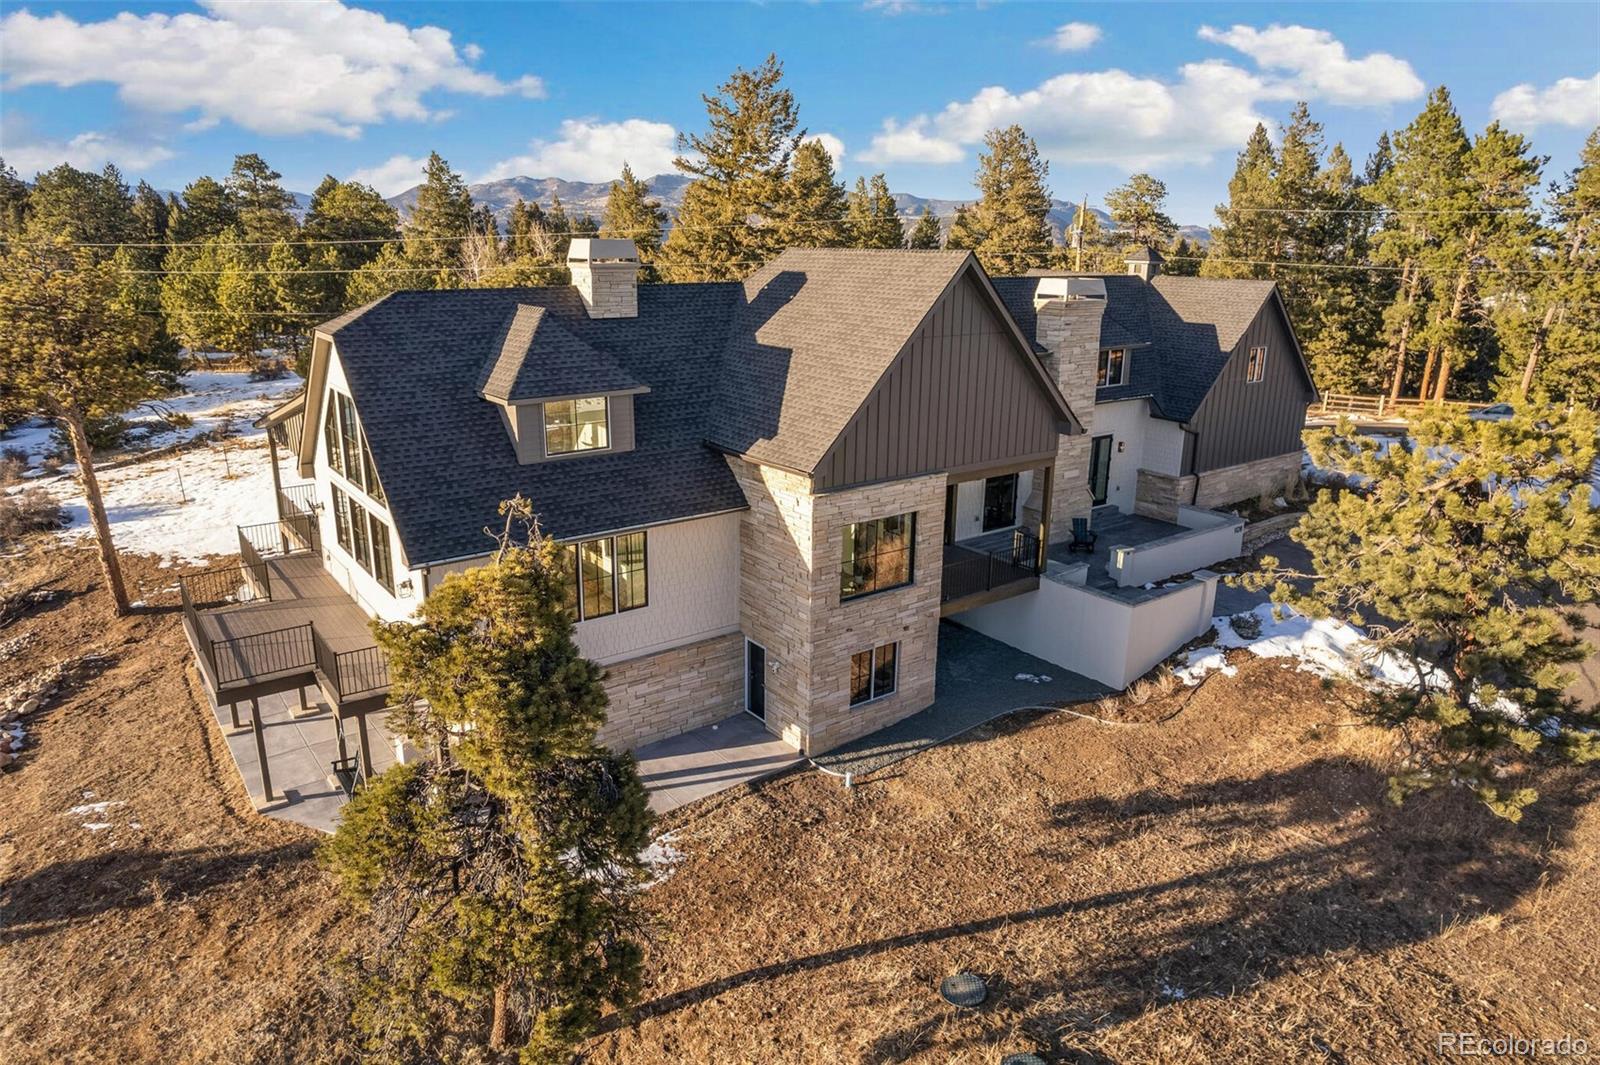 1128 County Road 65, Evergreen, CO 80439 - MLS#: 8243249